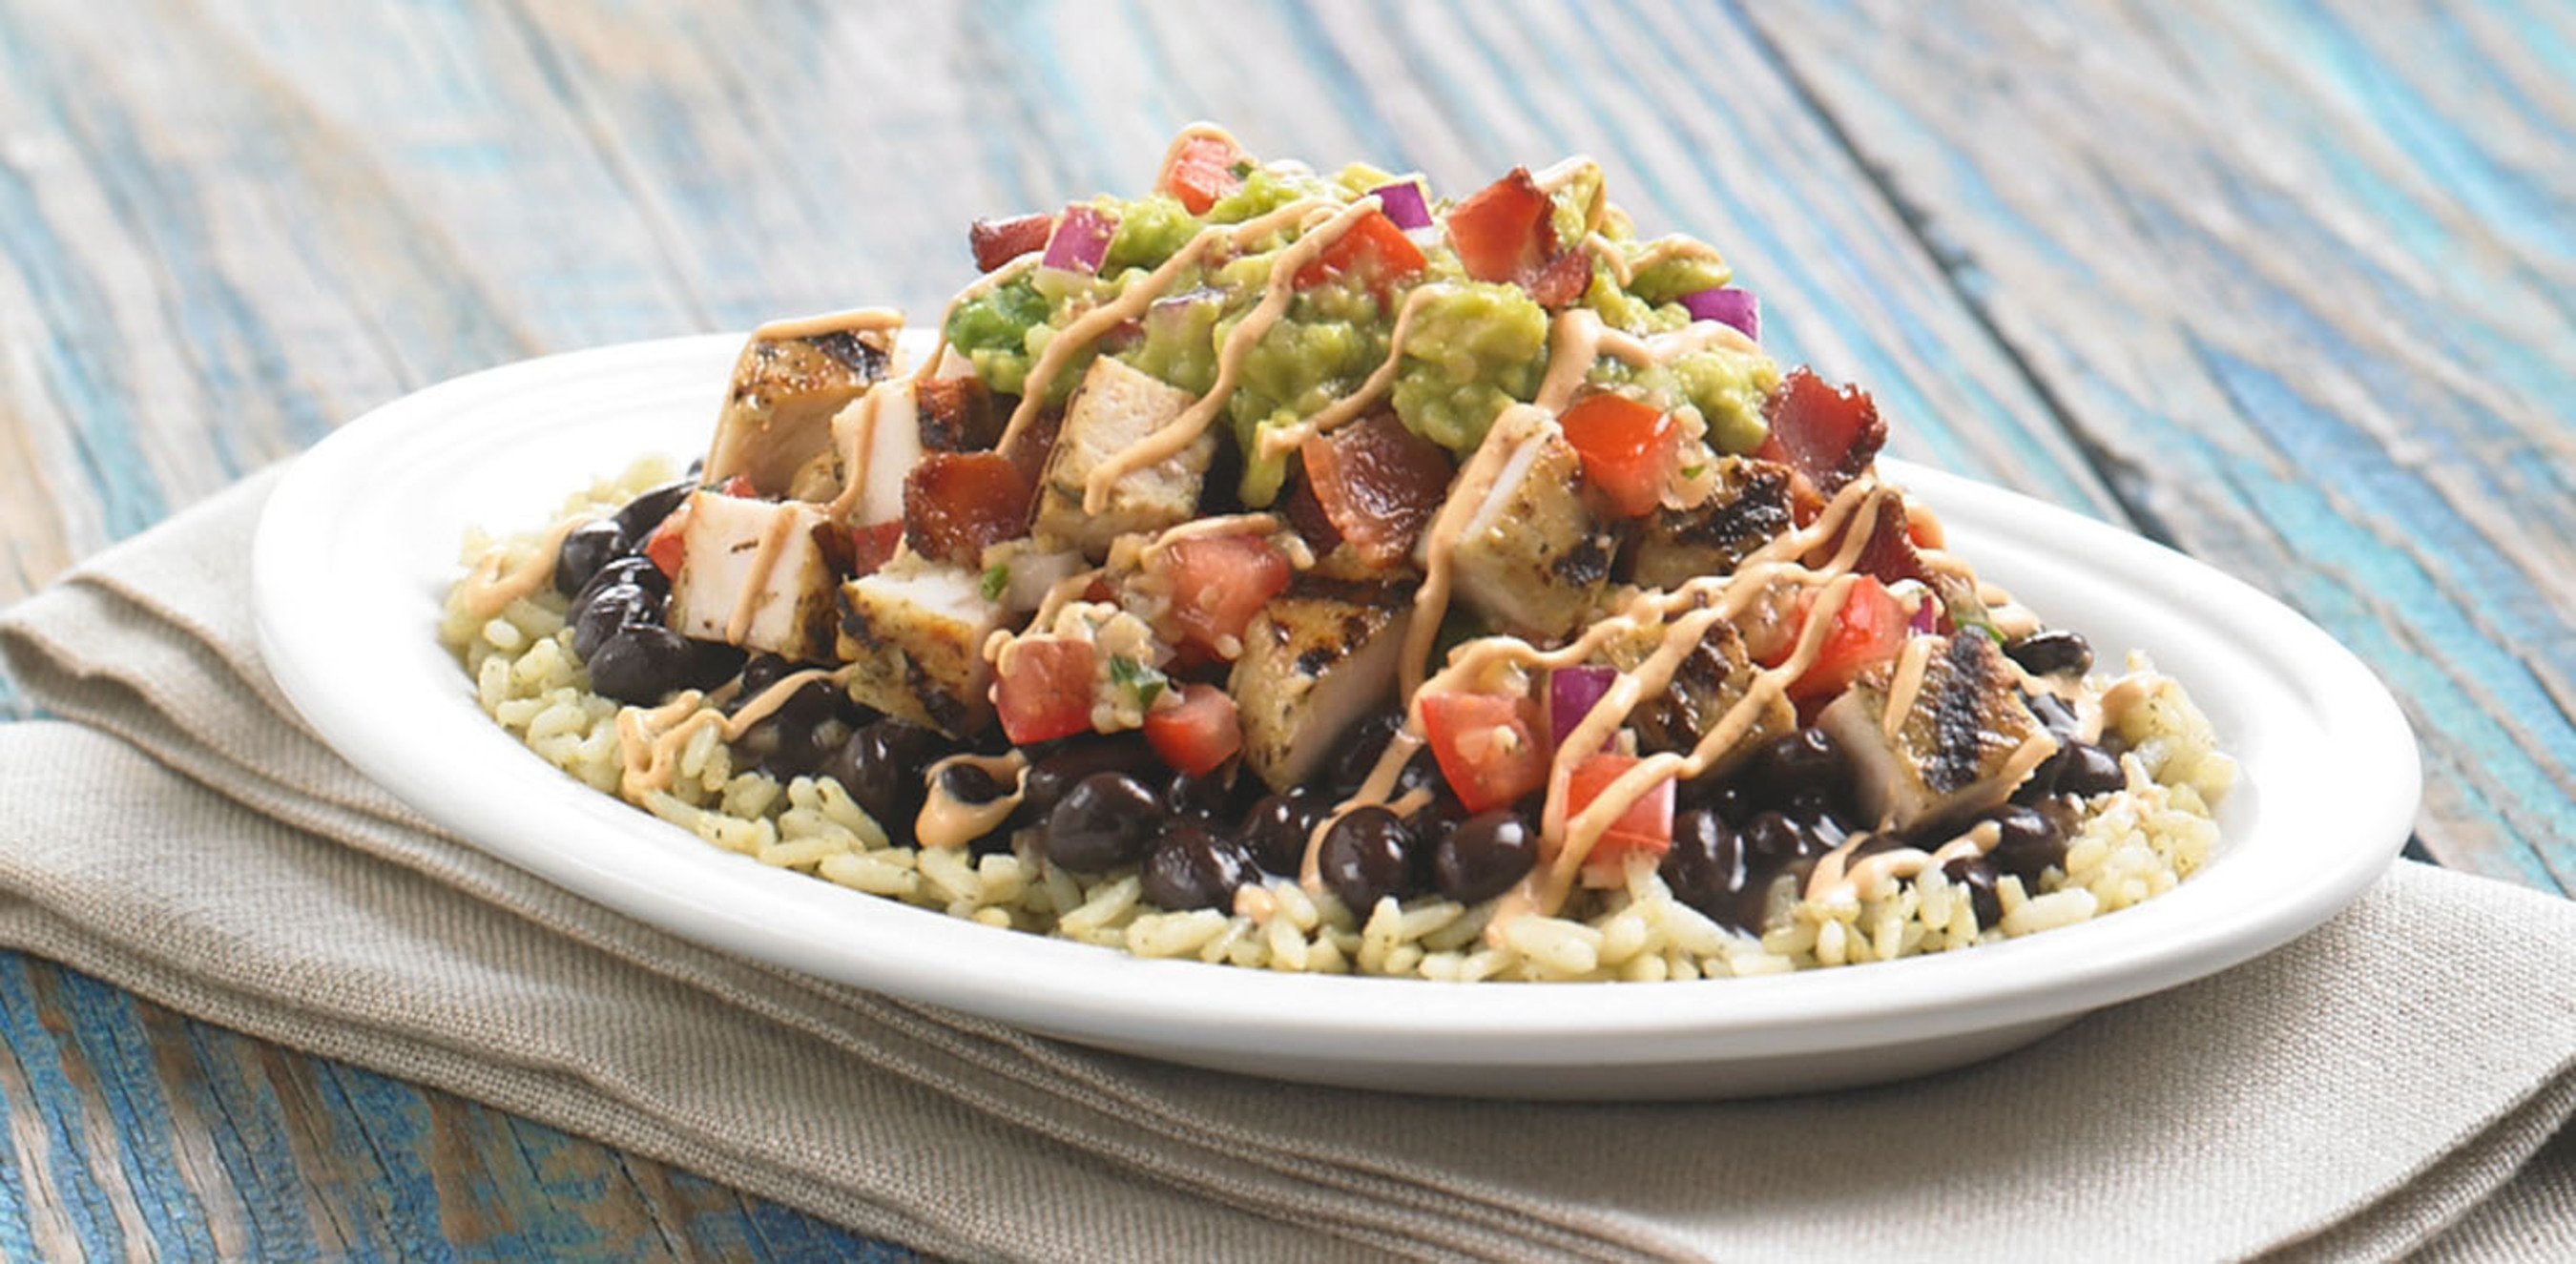 Daphne's introduces the Cali-Greek Bowl, a delicious entree that takes its inspiration from the brand's Greek heritage and adds a fresh California flair. (PRNewsFoto/Daphne's California Greek) (PRNewsFoto/DAPHNE'S CALIFORNIA GREEK)